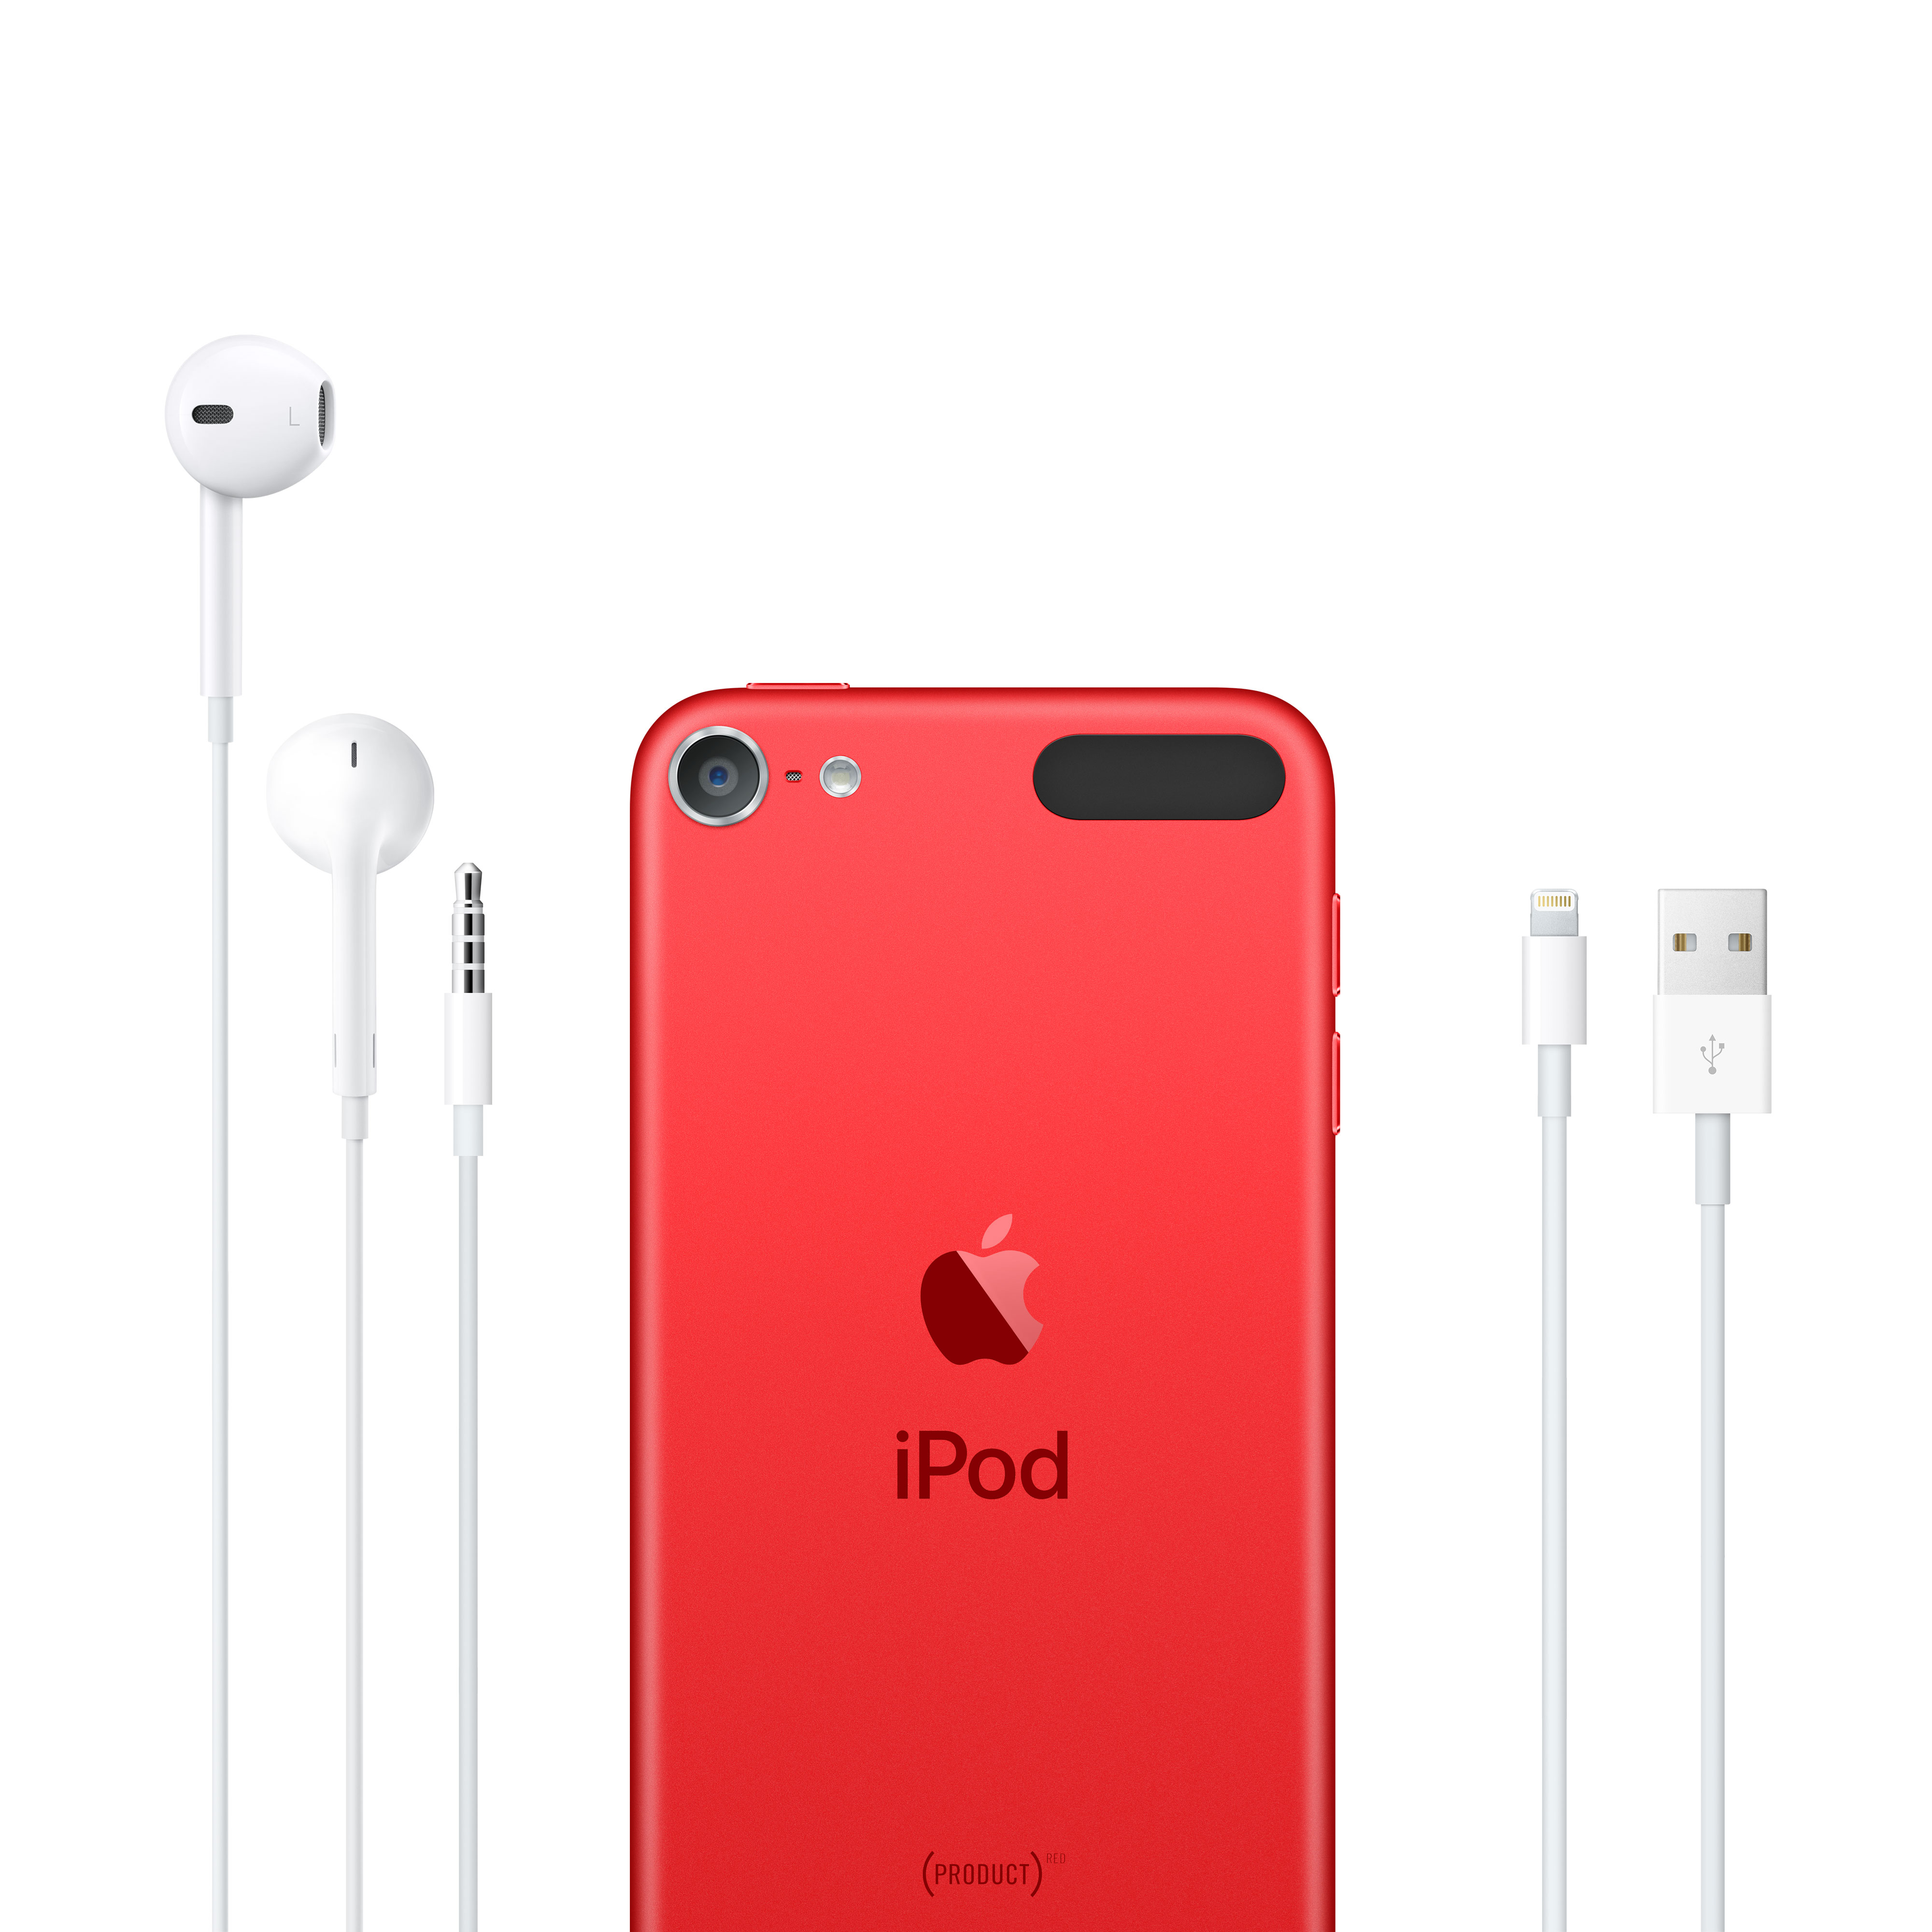 Apple iPod touch 7th Generation 128GB - PRODUCT(RED) (New Model) - image 5 of 6